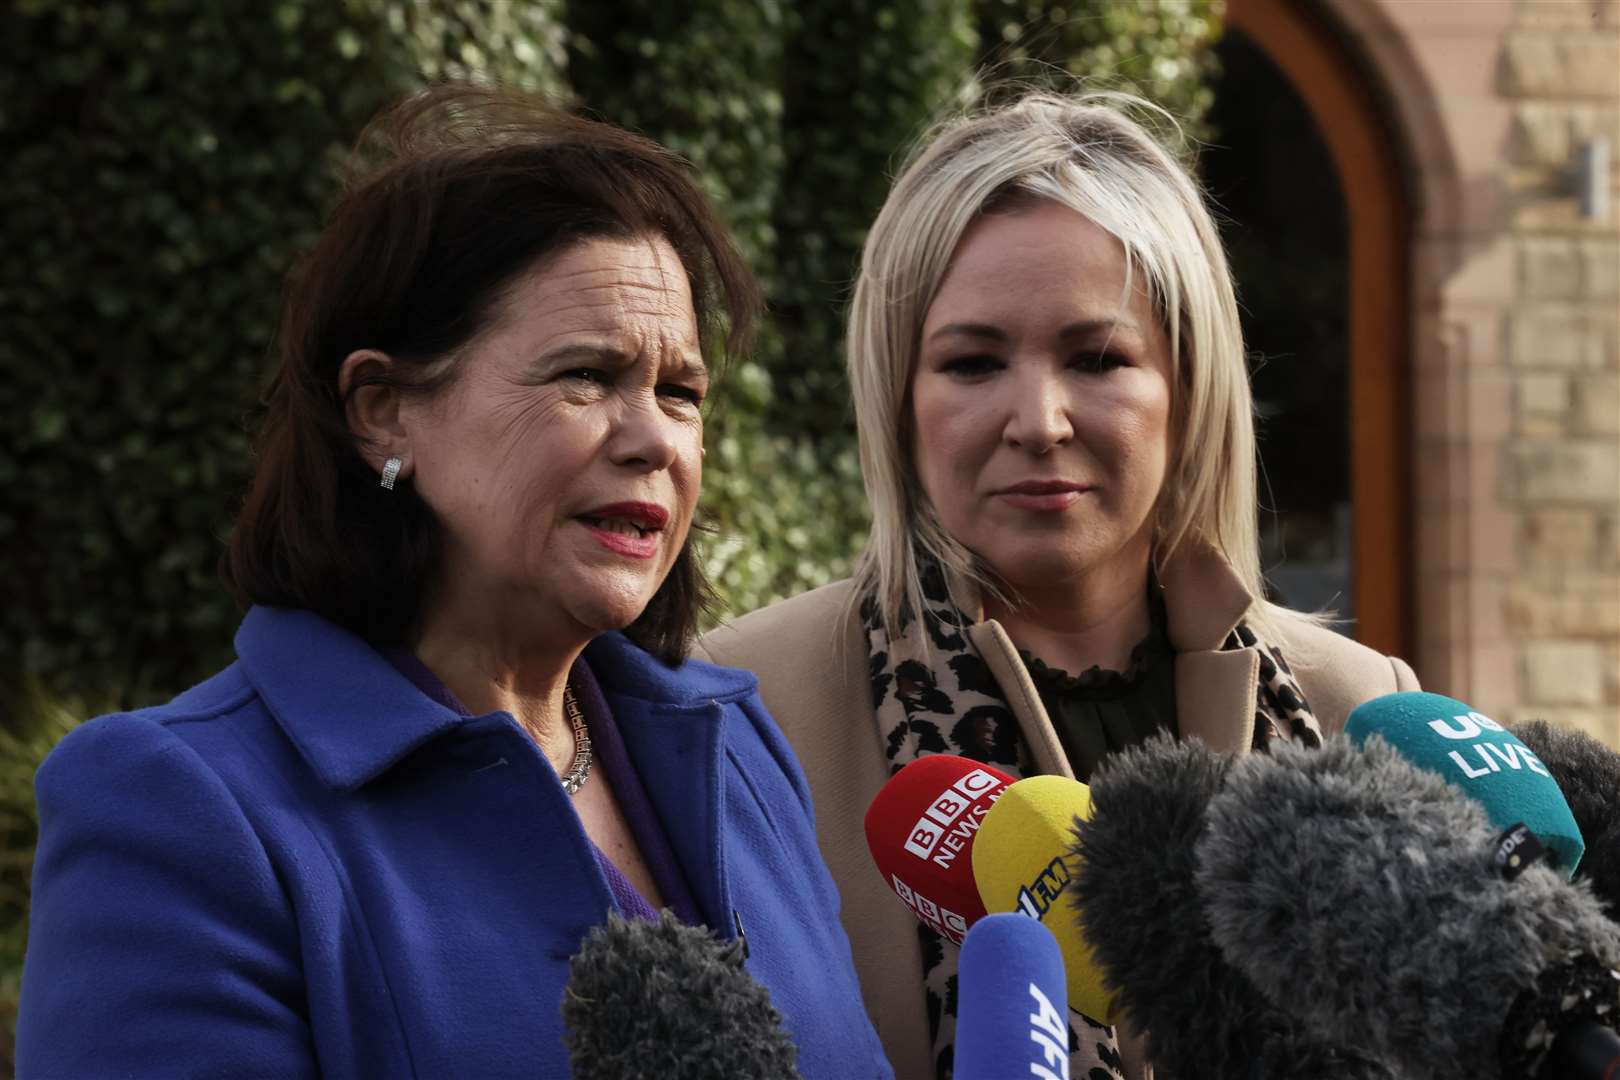 Sinn Fein Party leader Mary Lou McDonald (left) and vice president Michelle O’Neill speak to the media outside the Culloden Hotel in Belfast. (PA)